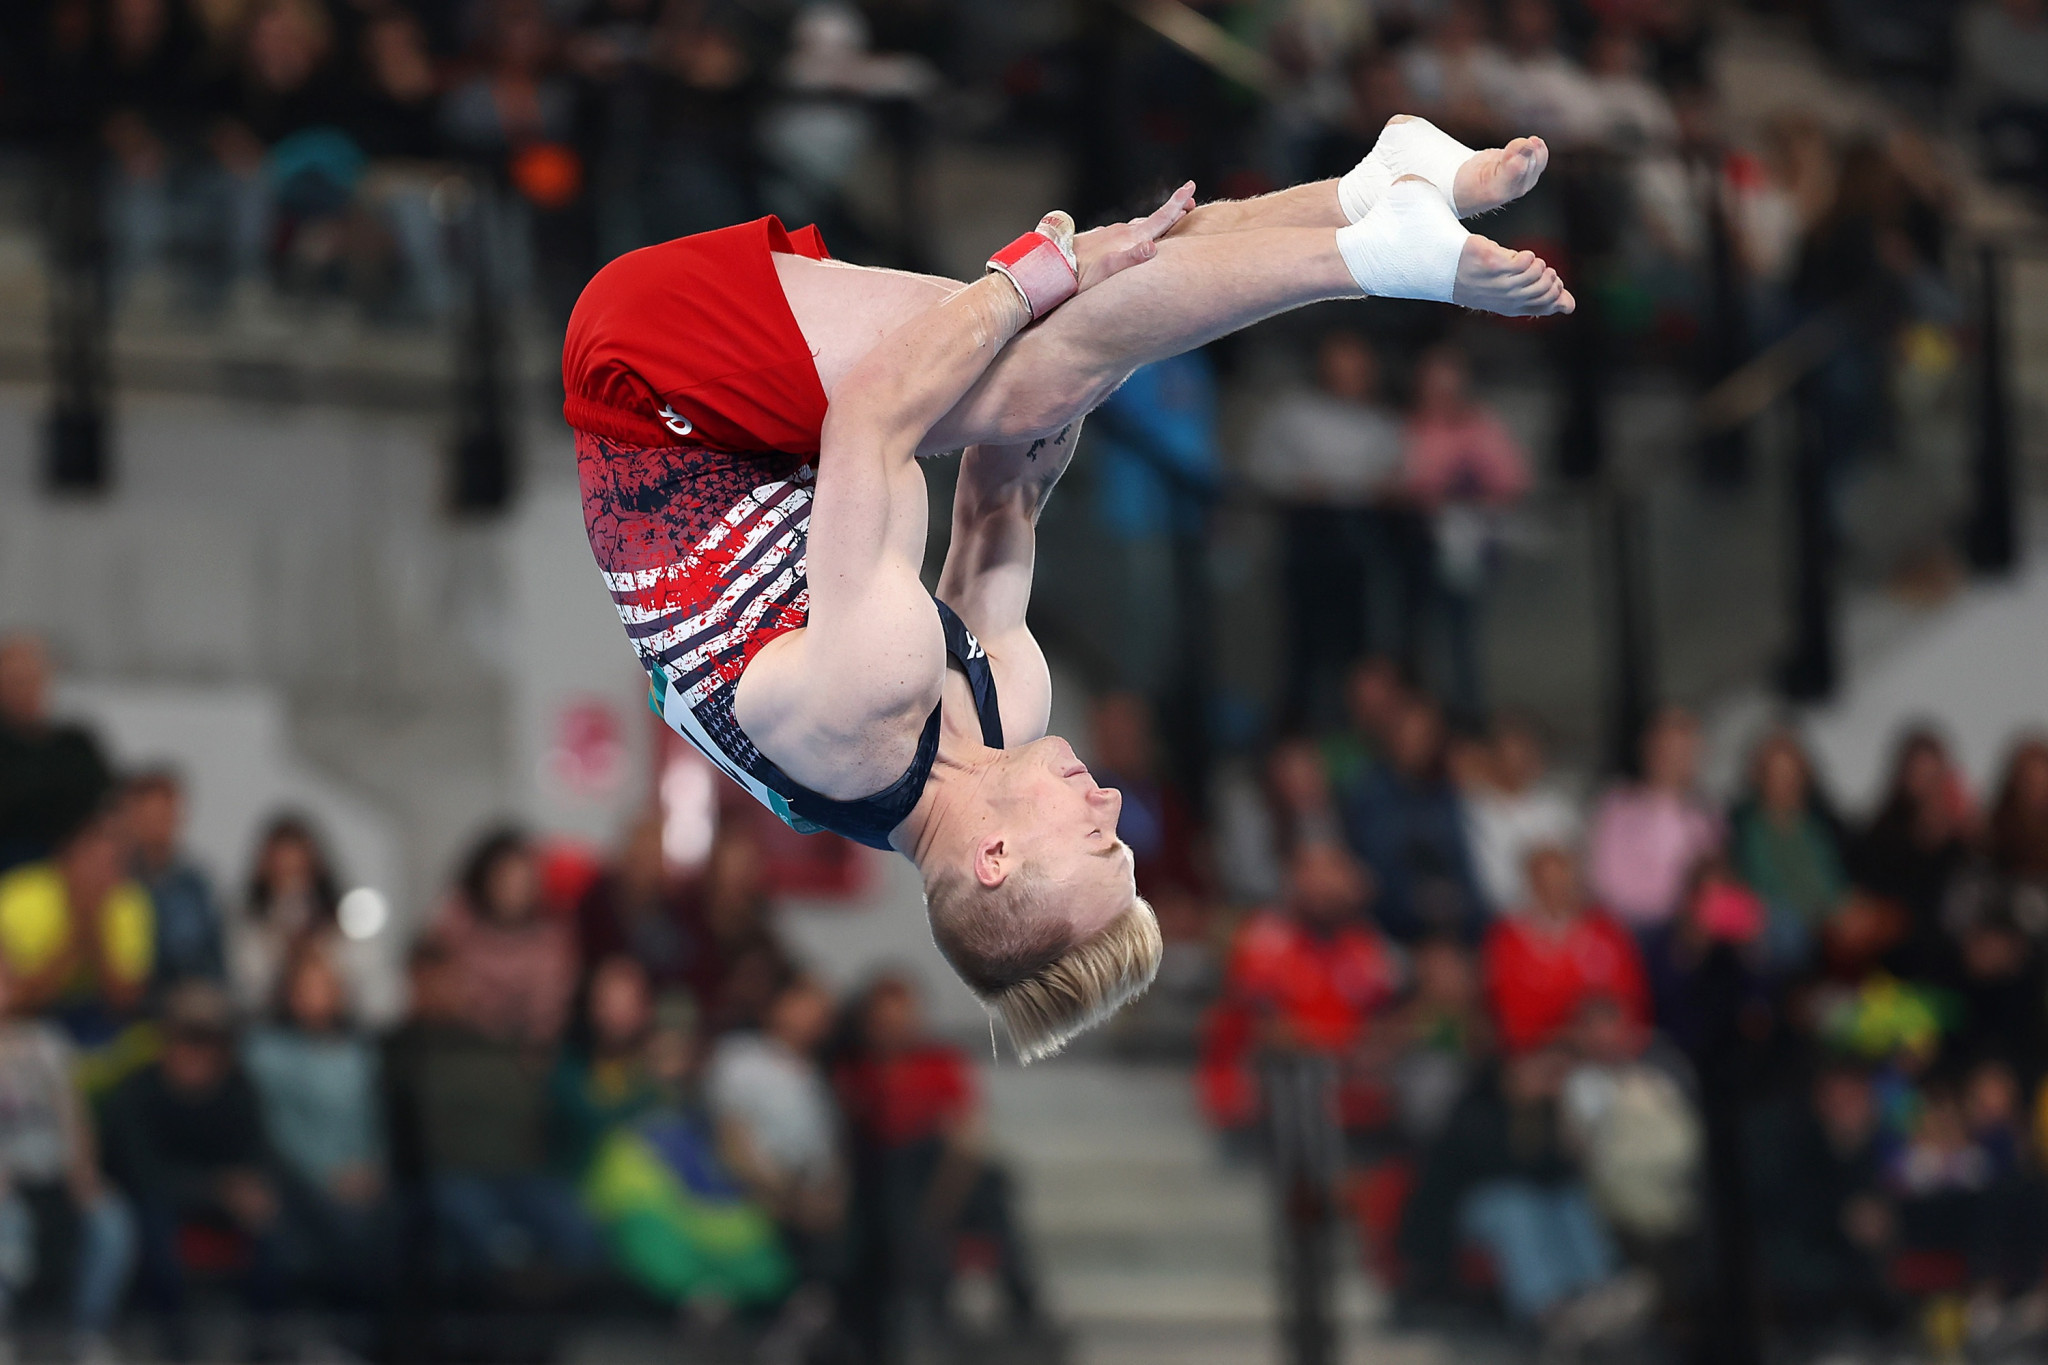 Cameron Bock played a key role in helping the United States win artistic gymnastics men's team all-around gold ©Getty Images